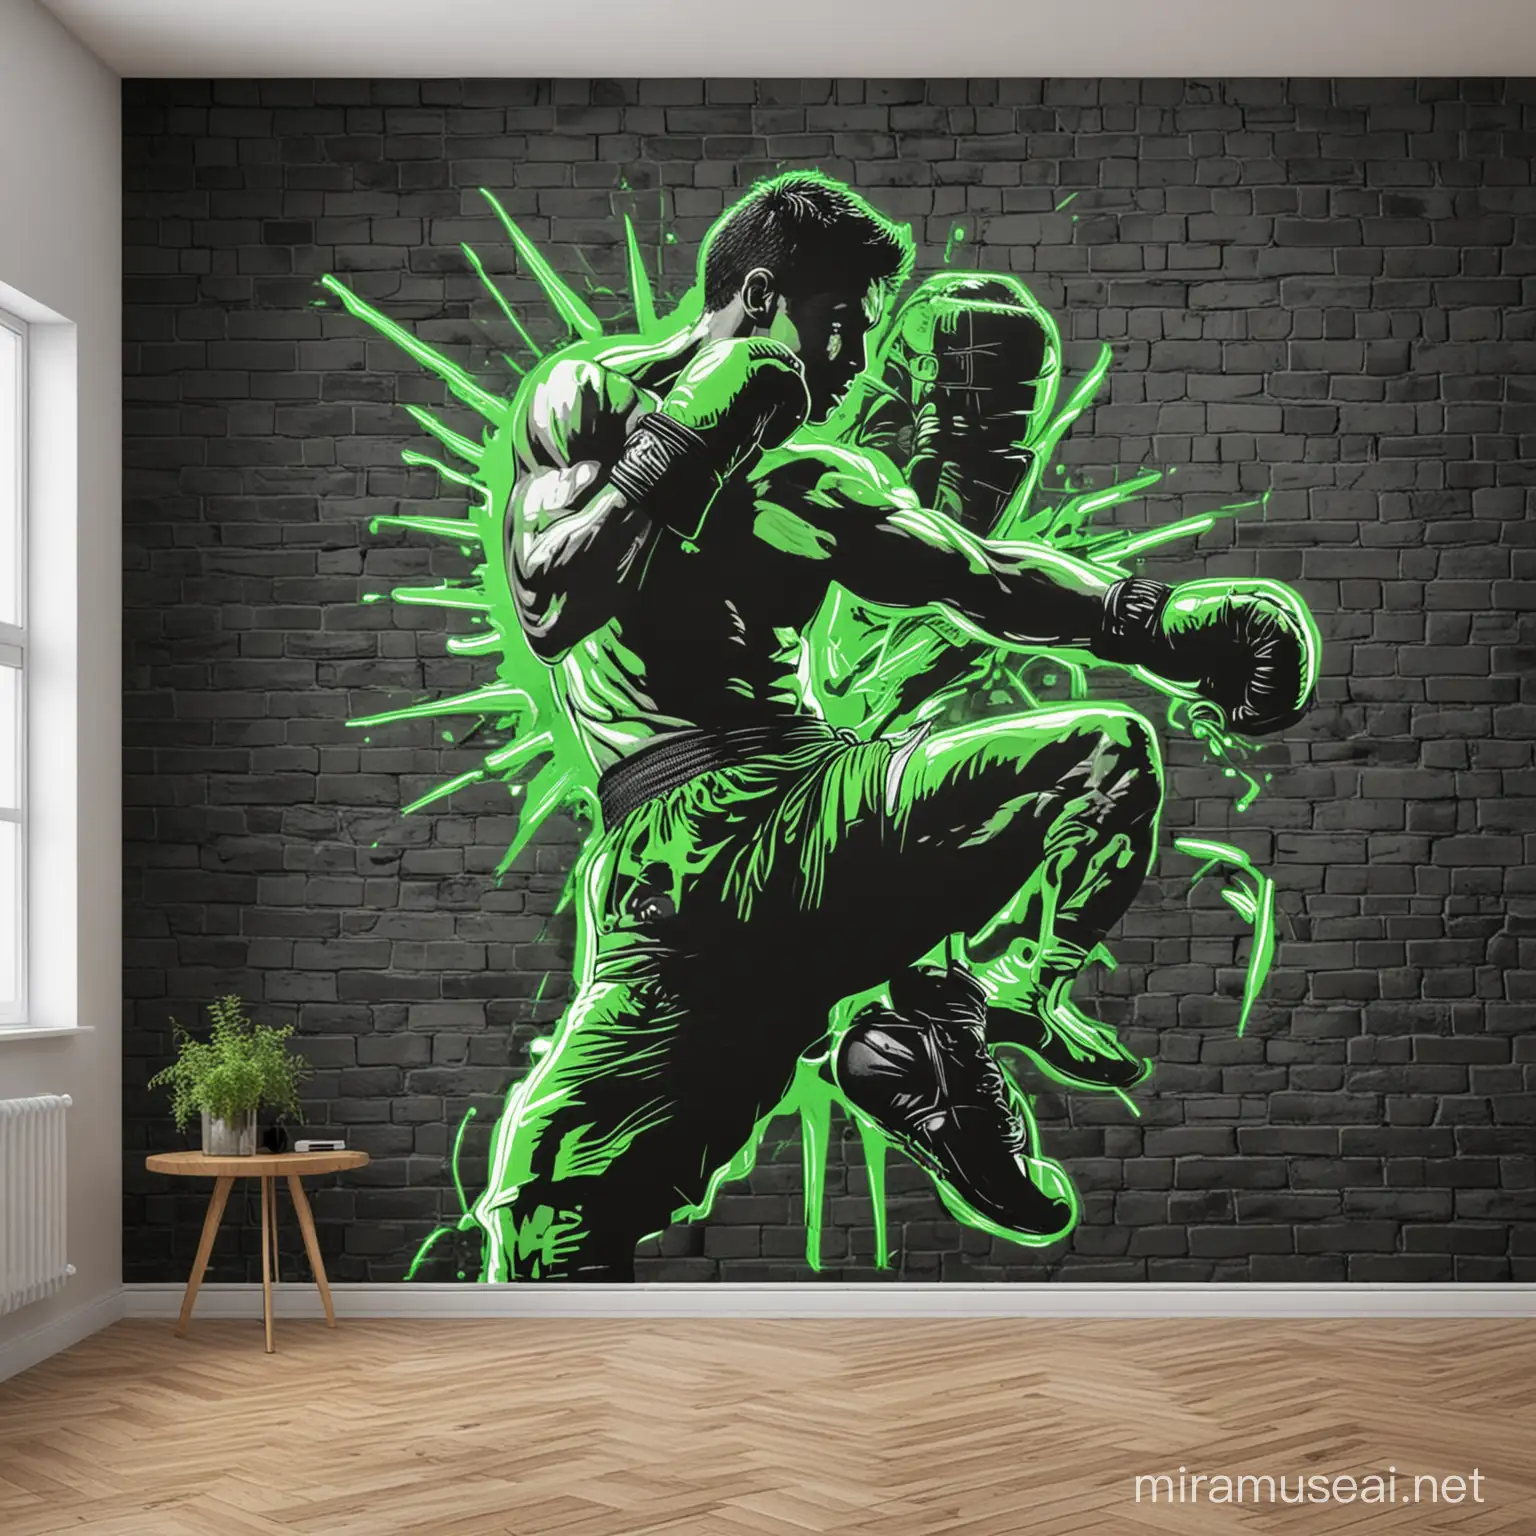 kick boxing mural with neon green accent without a background


